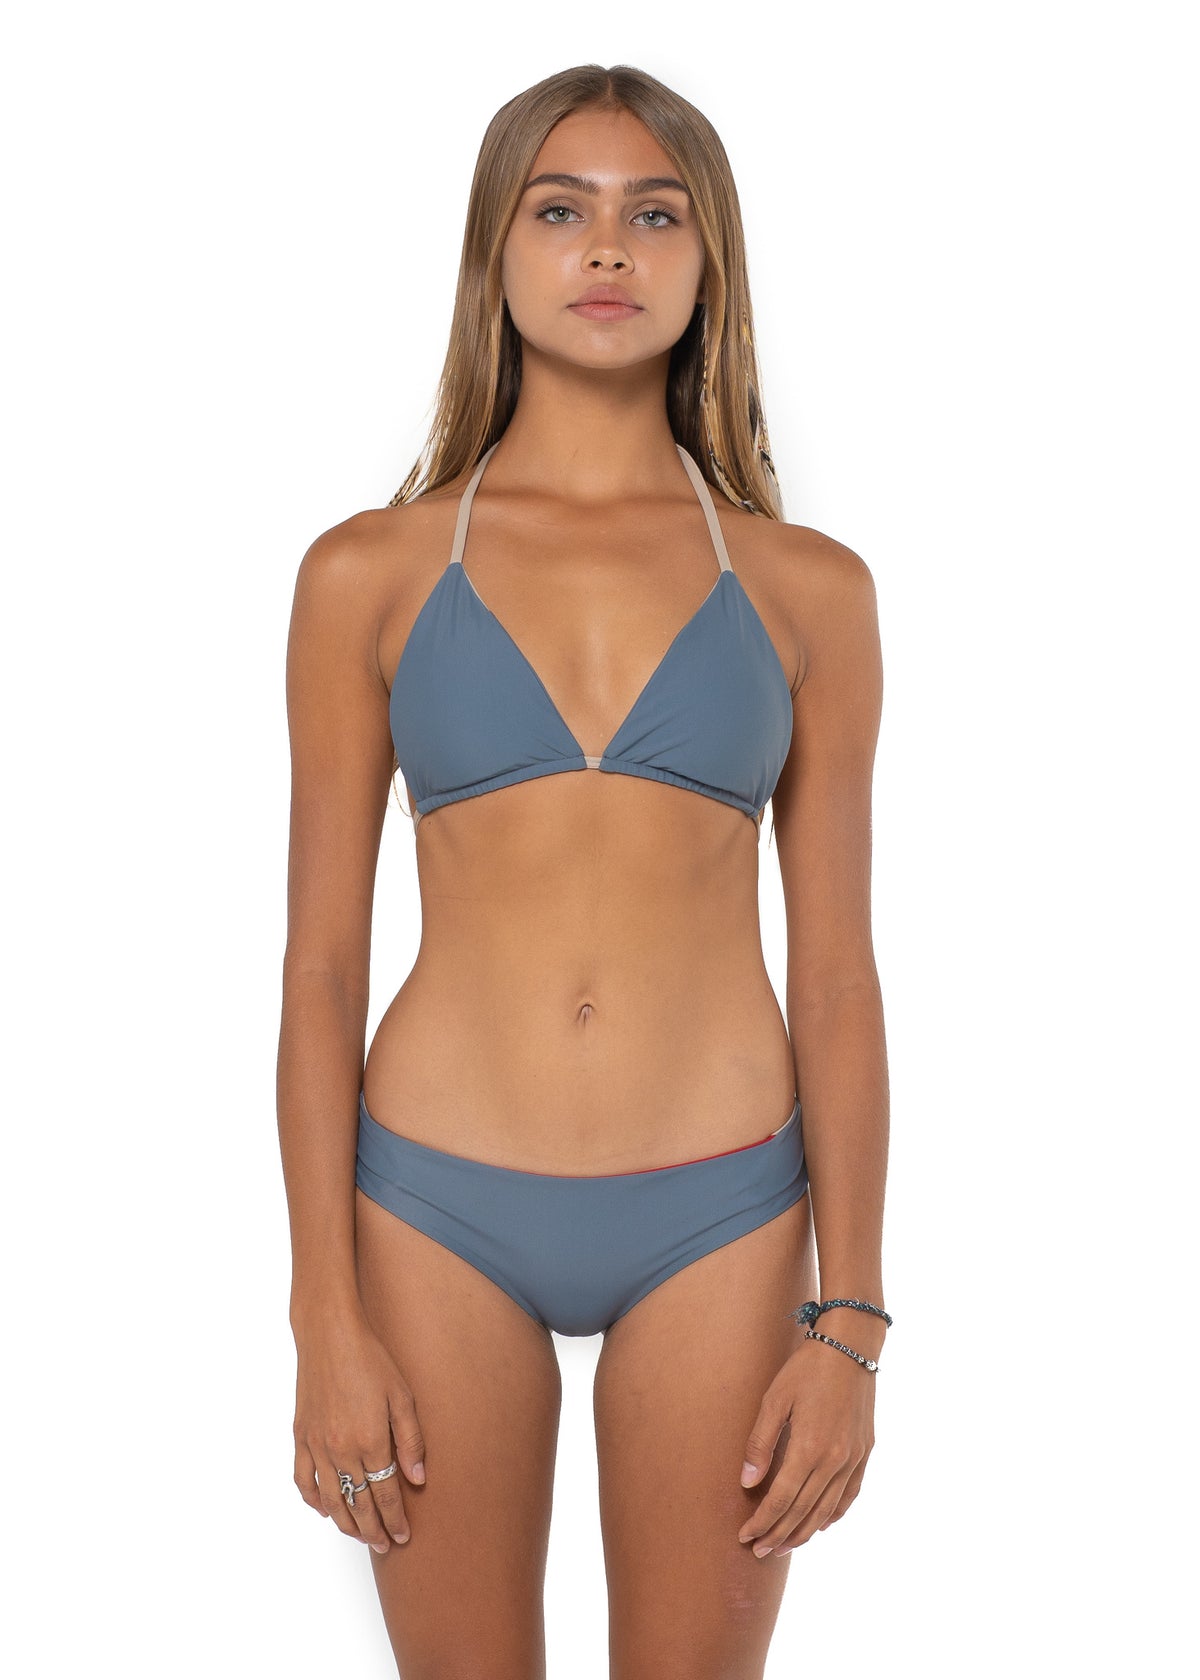 Canggu Reversible Triangle Top Grey Solid Front